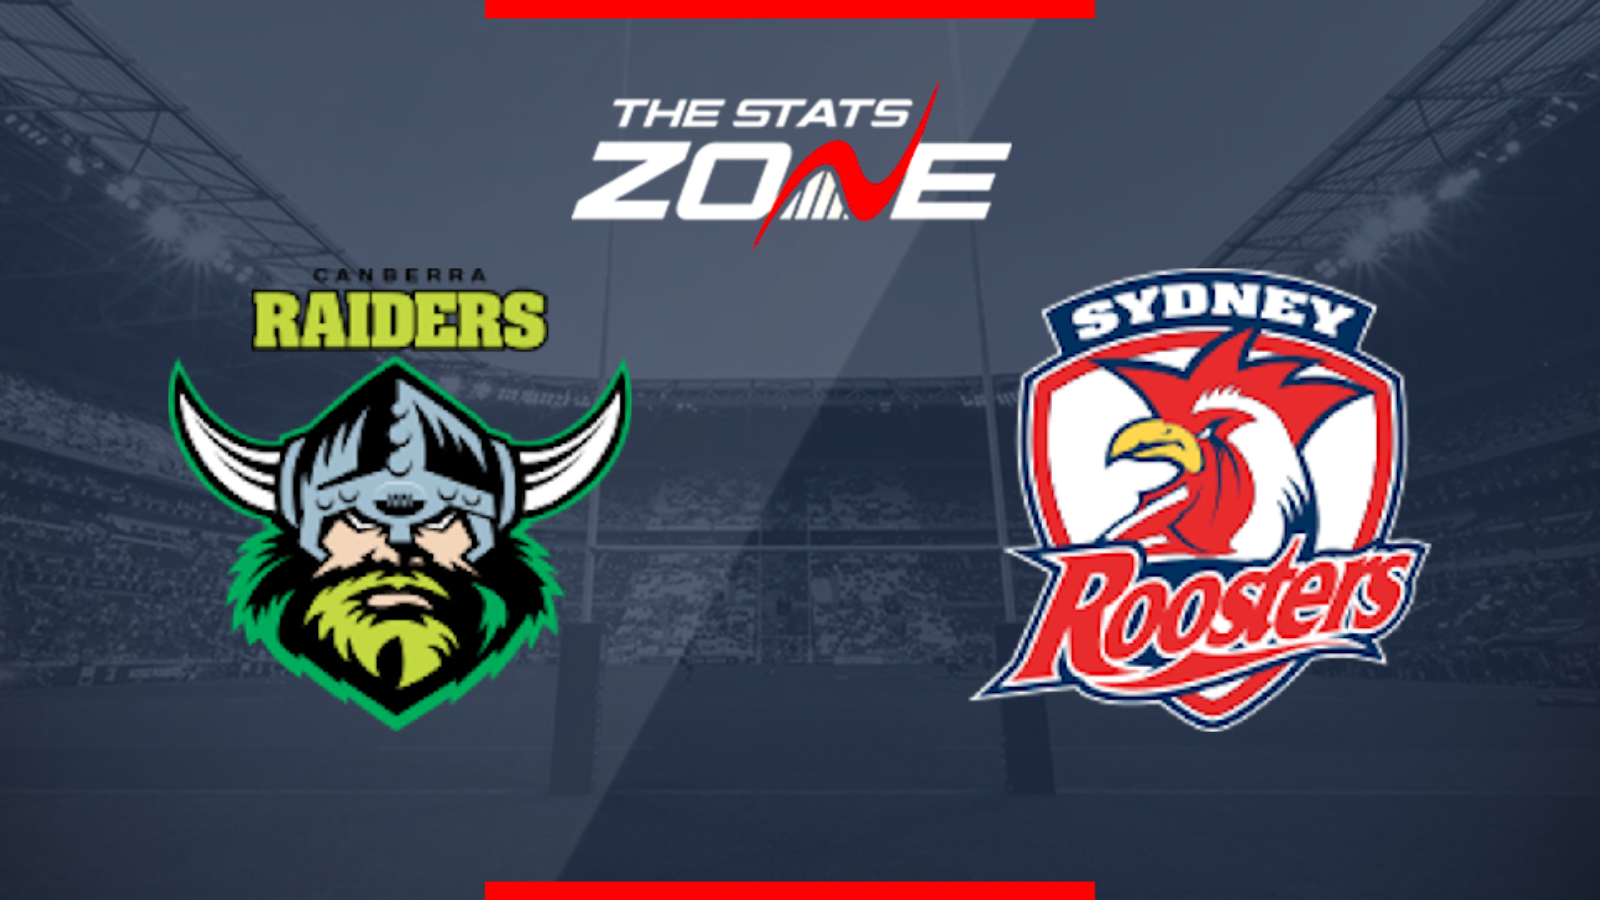 2019 Nrl Canberra Raiders Vs Sydney Roosters Preview Prediction The Stats Zone